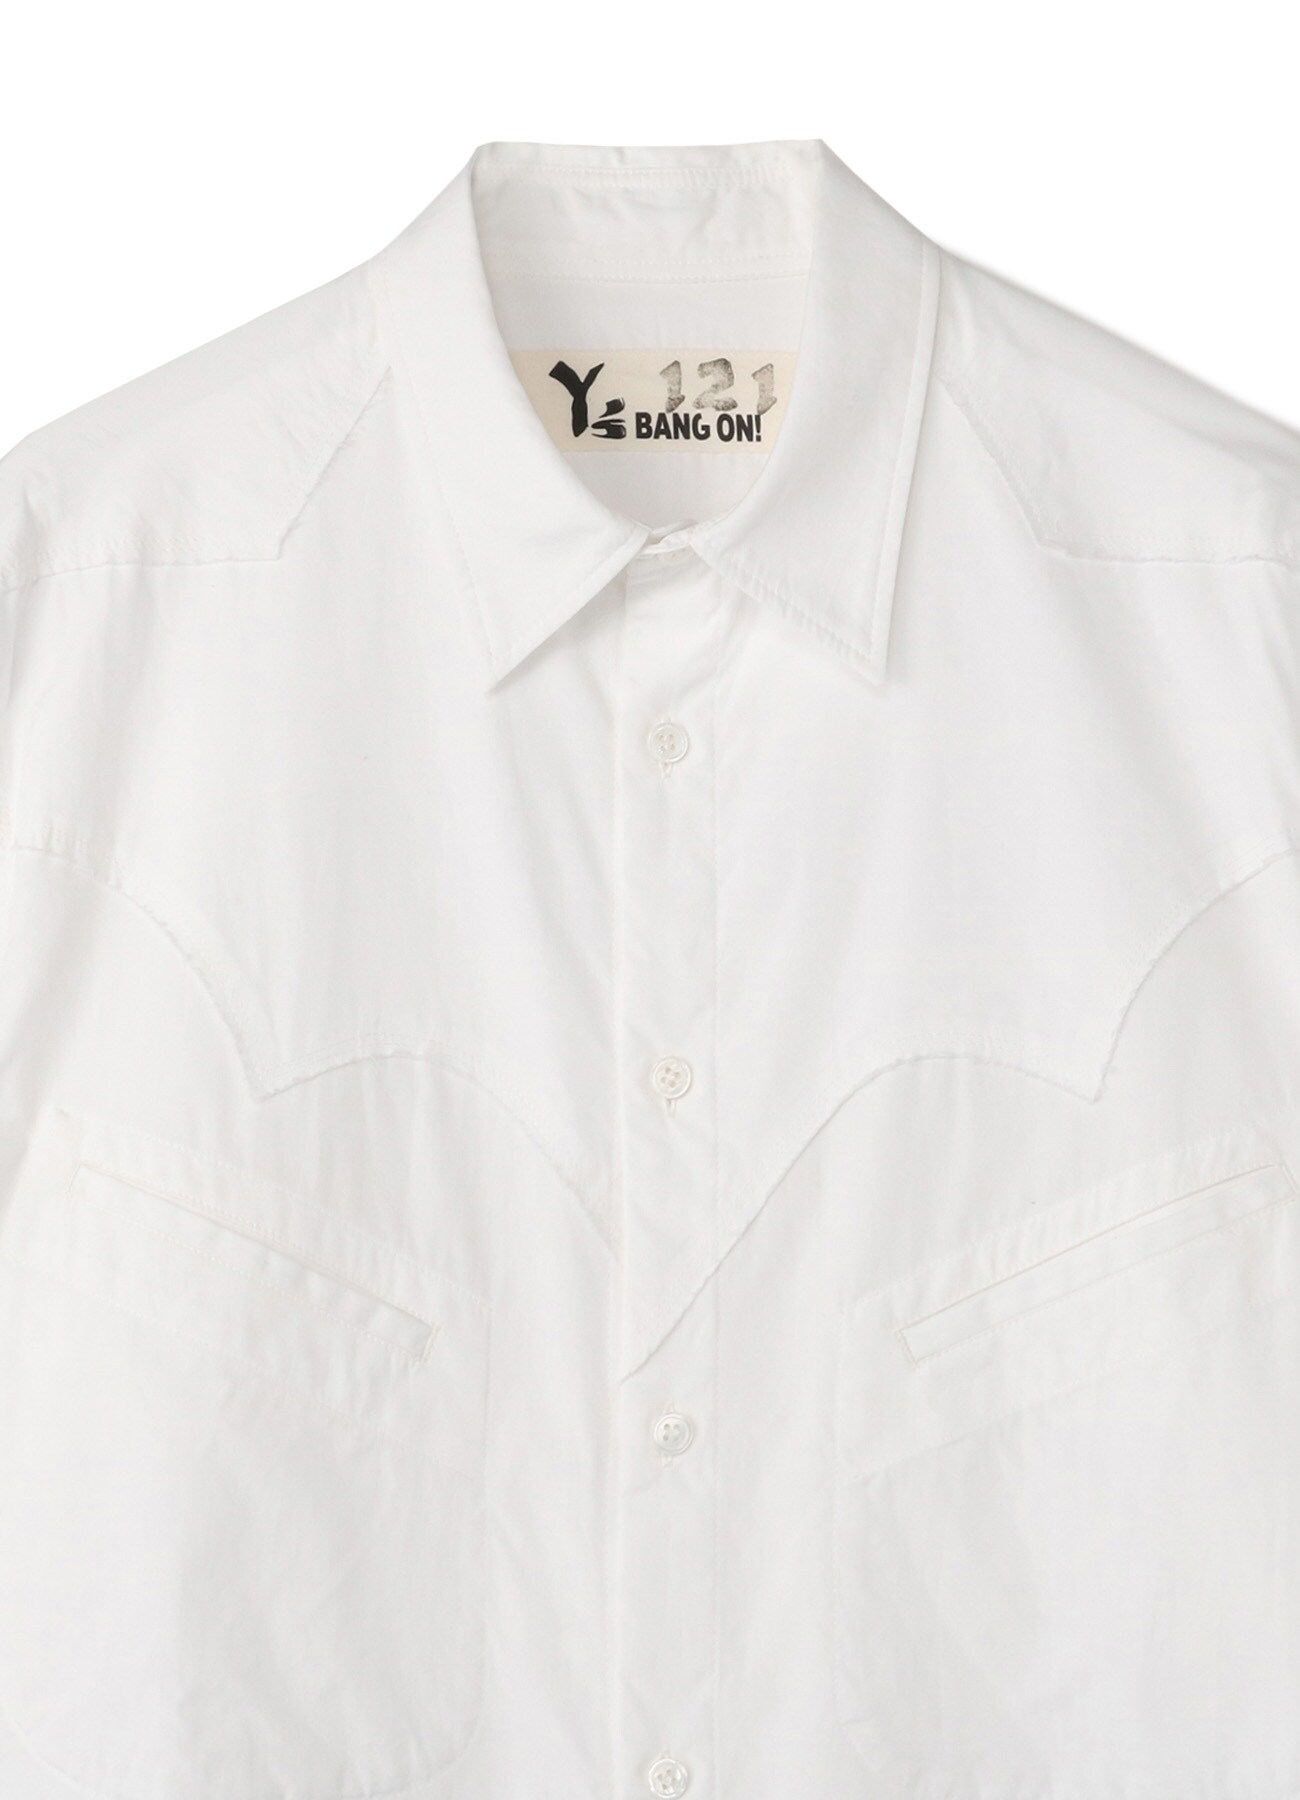 Y's BANG ON!No.121 Western style-shirts Cotton broad